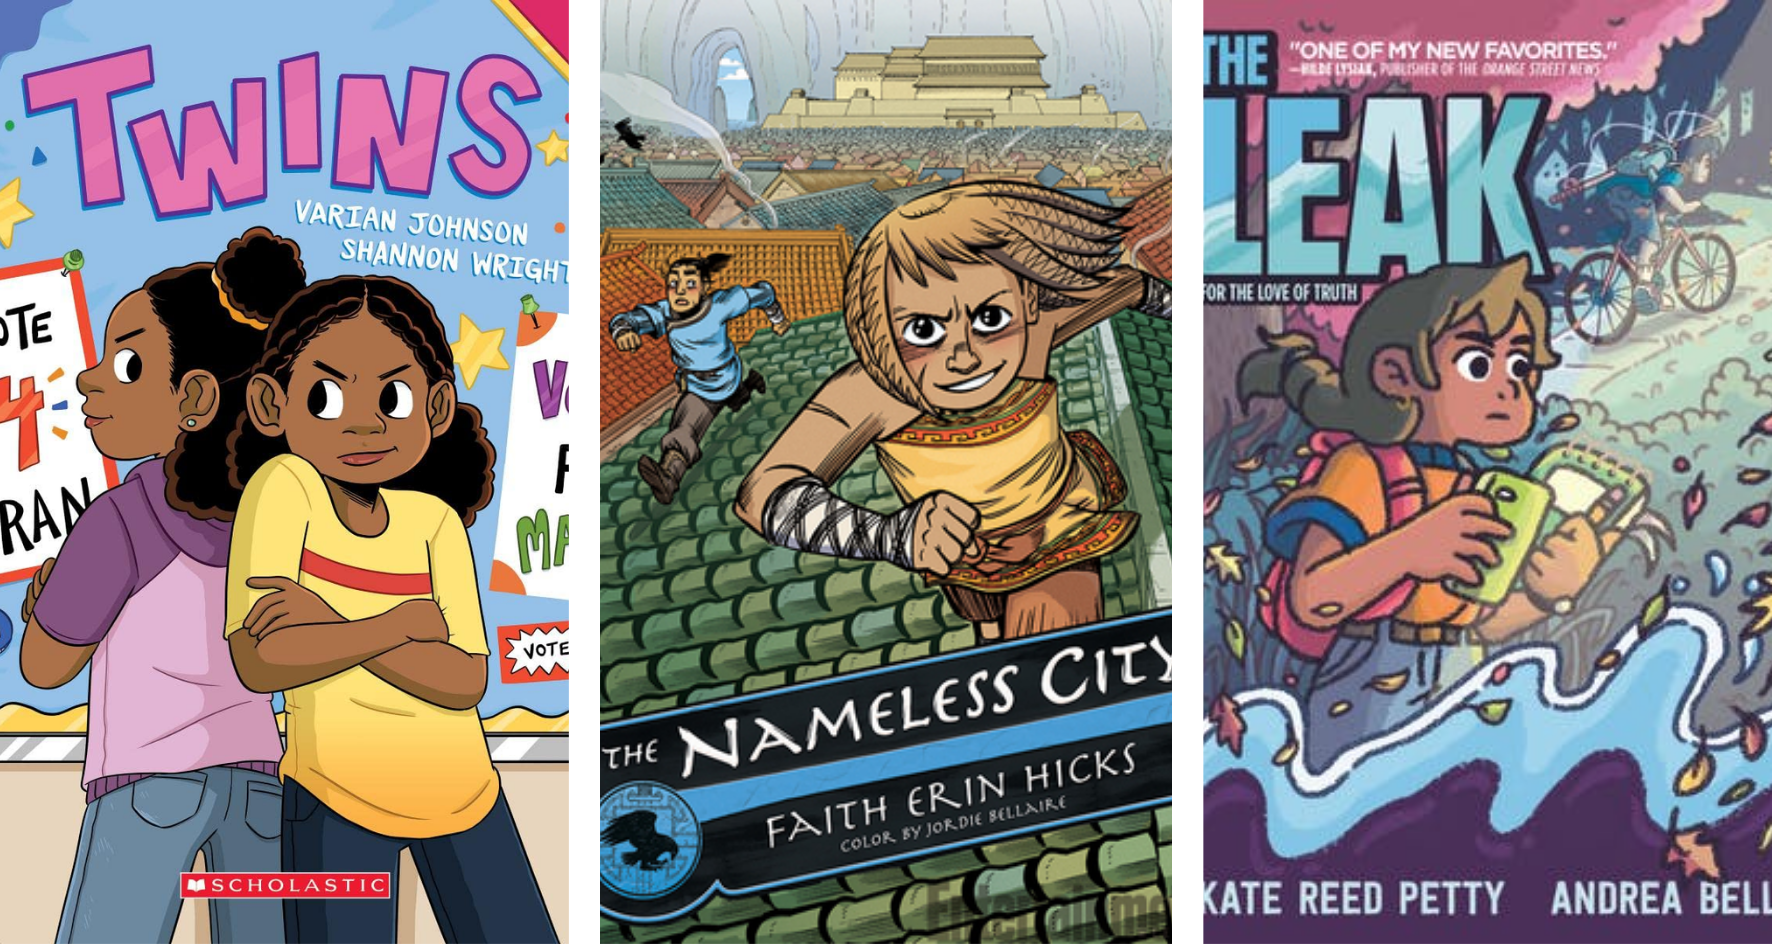 Three titles for Graphic Novel Book Club, Twins, Nameless City and Leak